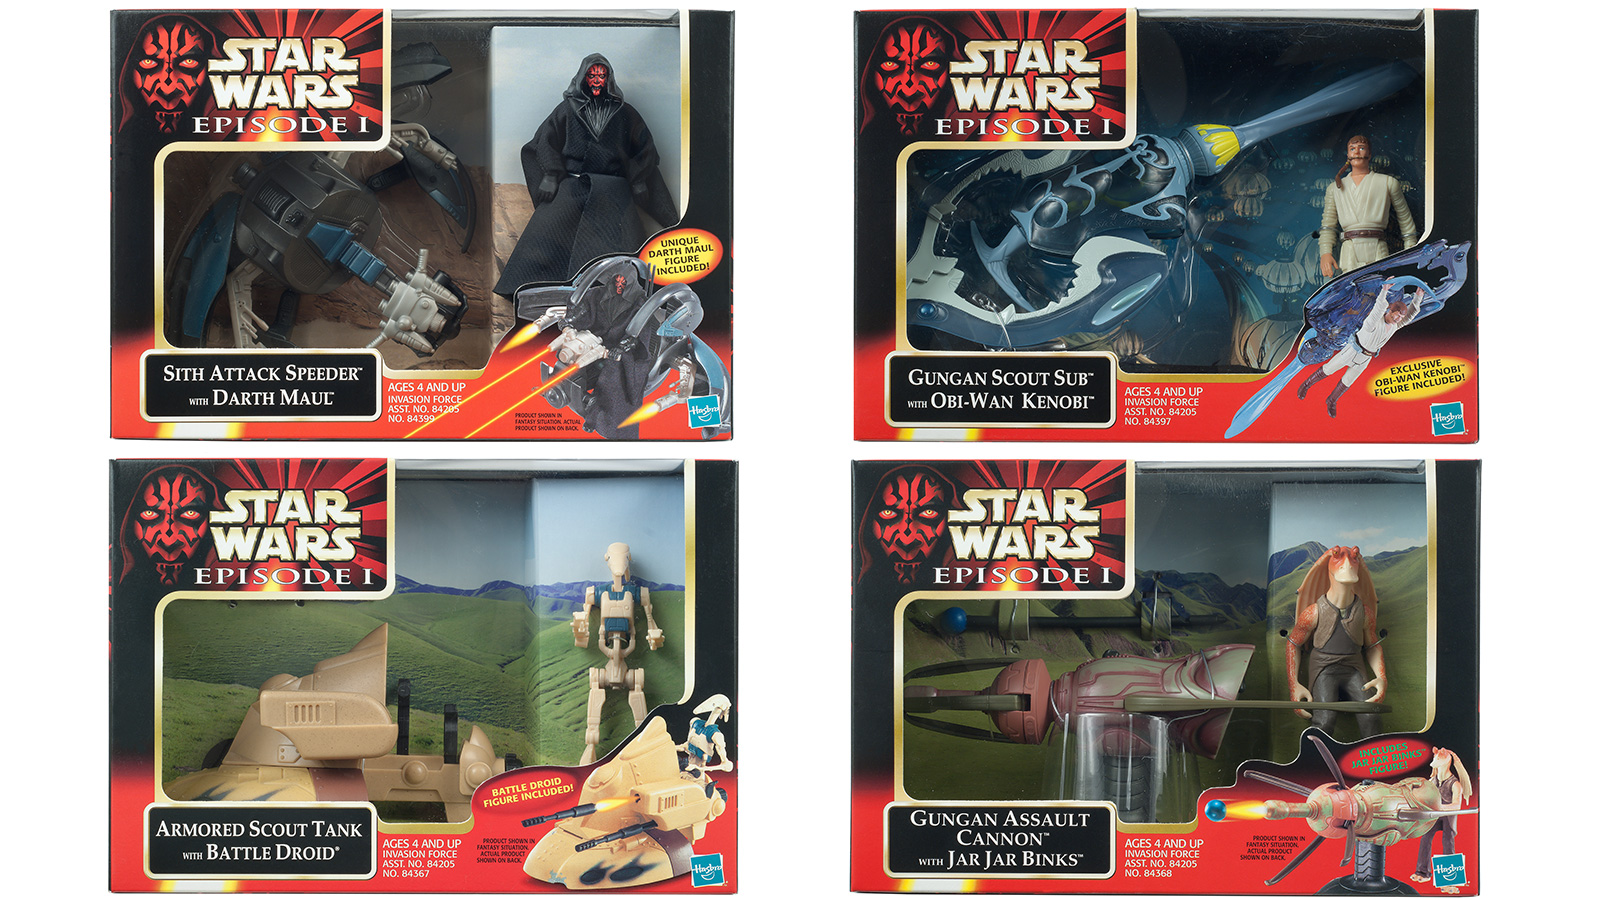 Remembering The Phantom Menace Invasion Force Vehicles & Weapons